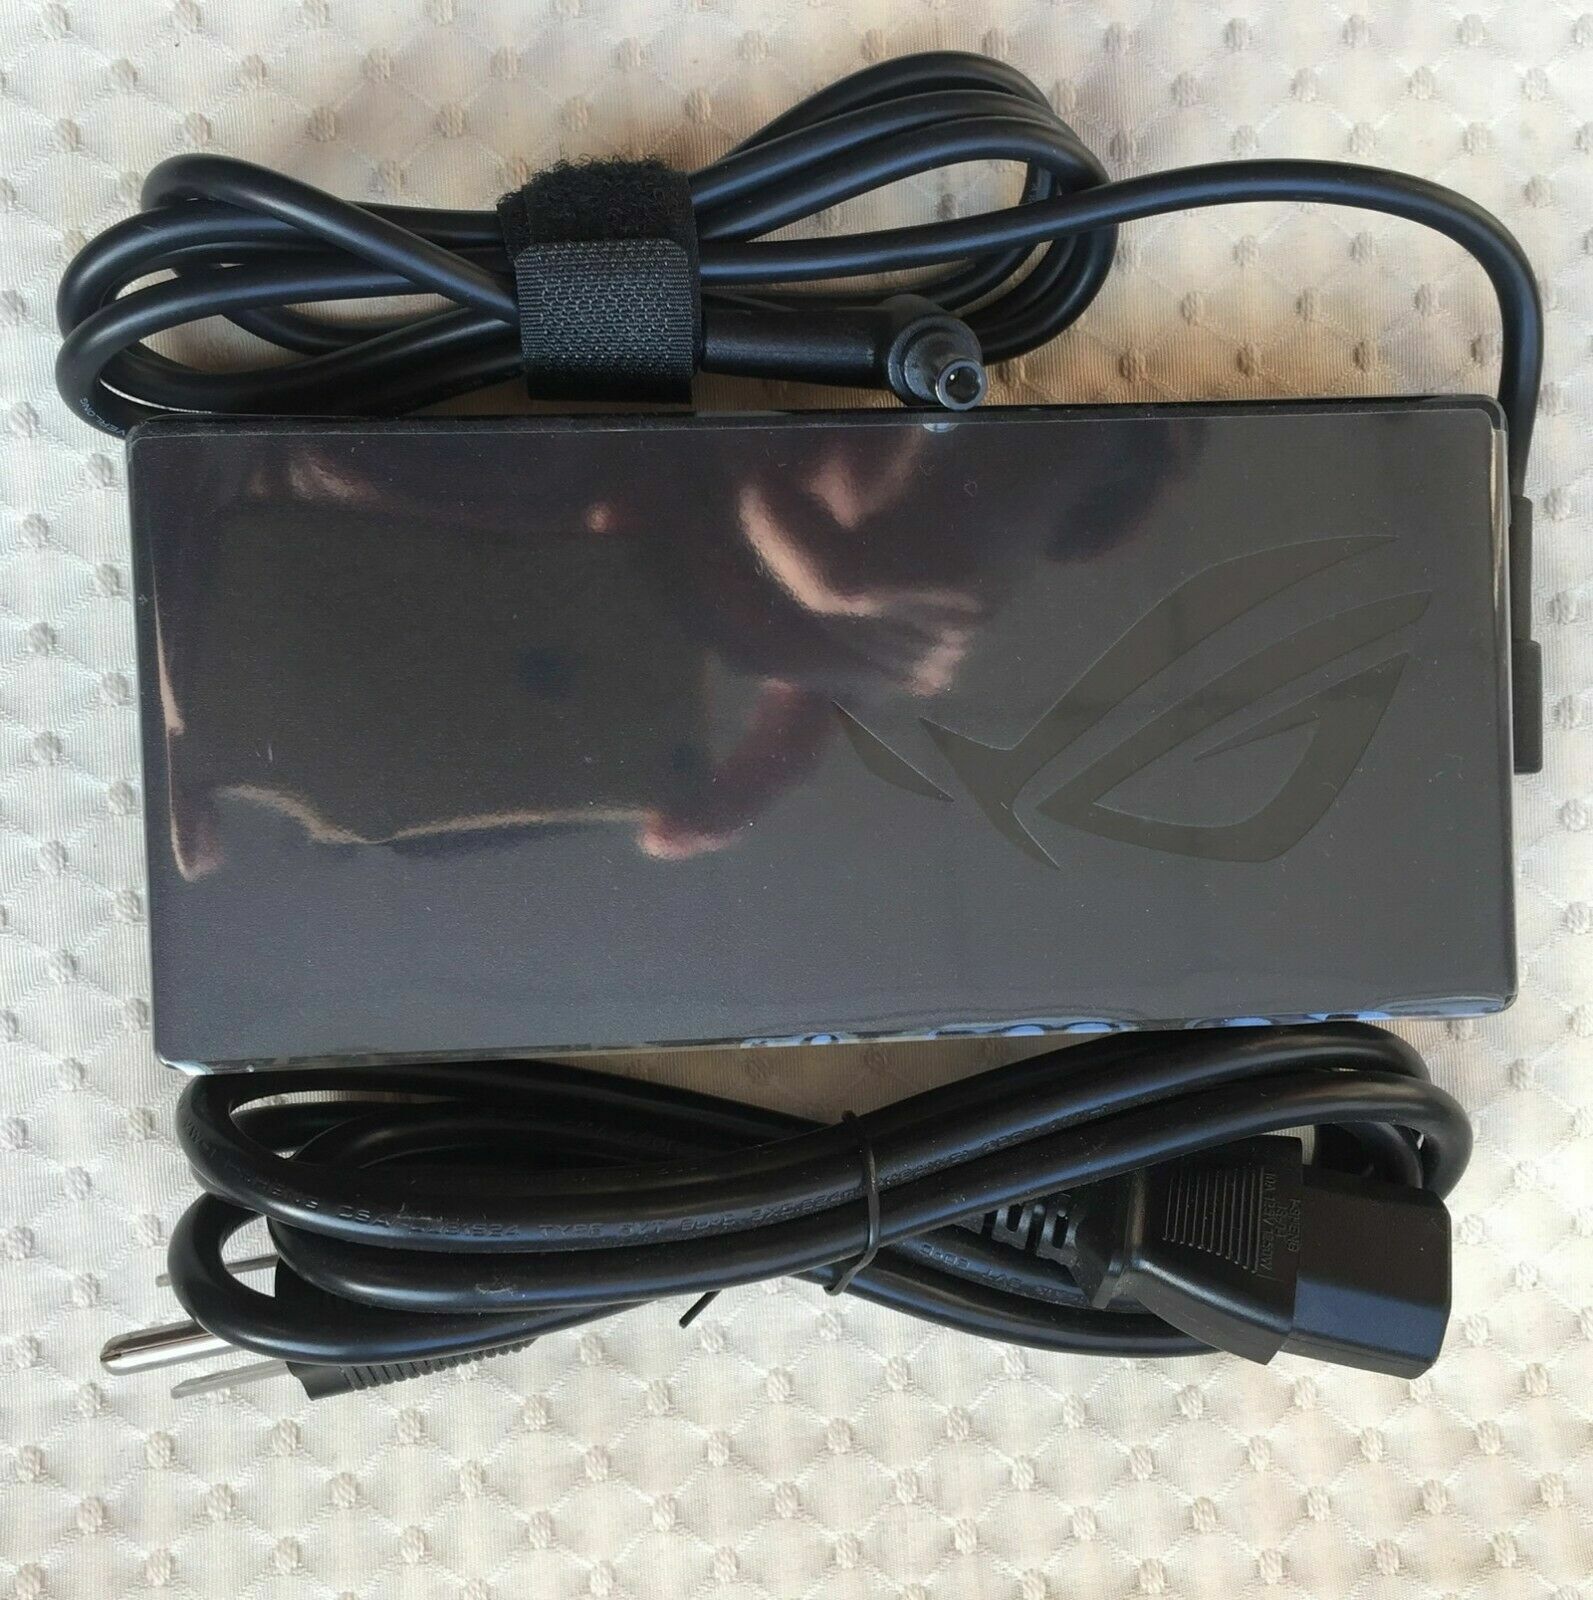 Genuine Asus Laptop Charger AC Adapter Power Supply ADP-150CH B 20V 7.5A 150W